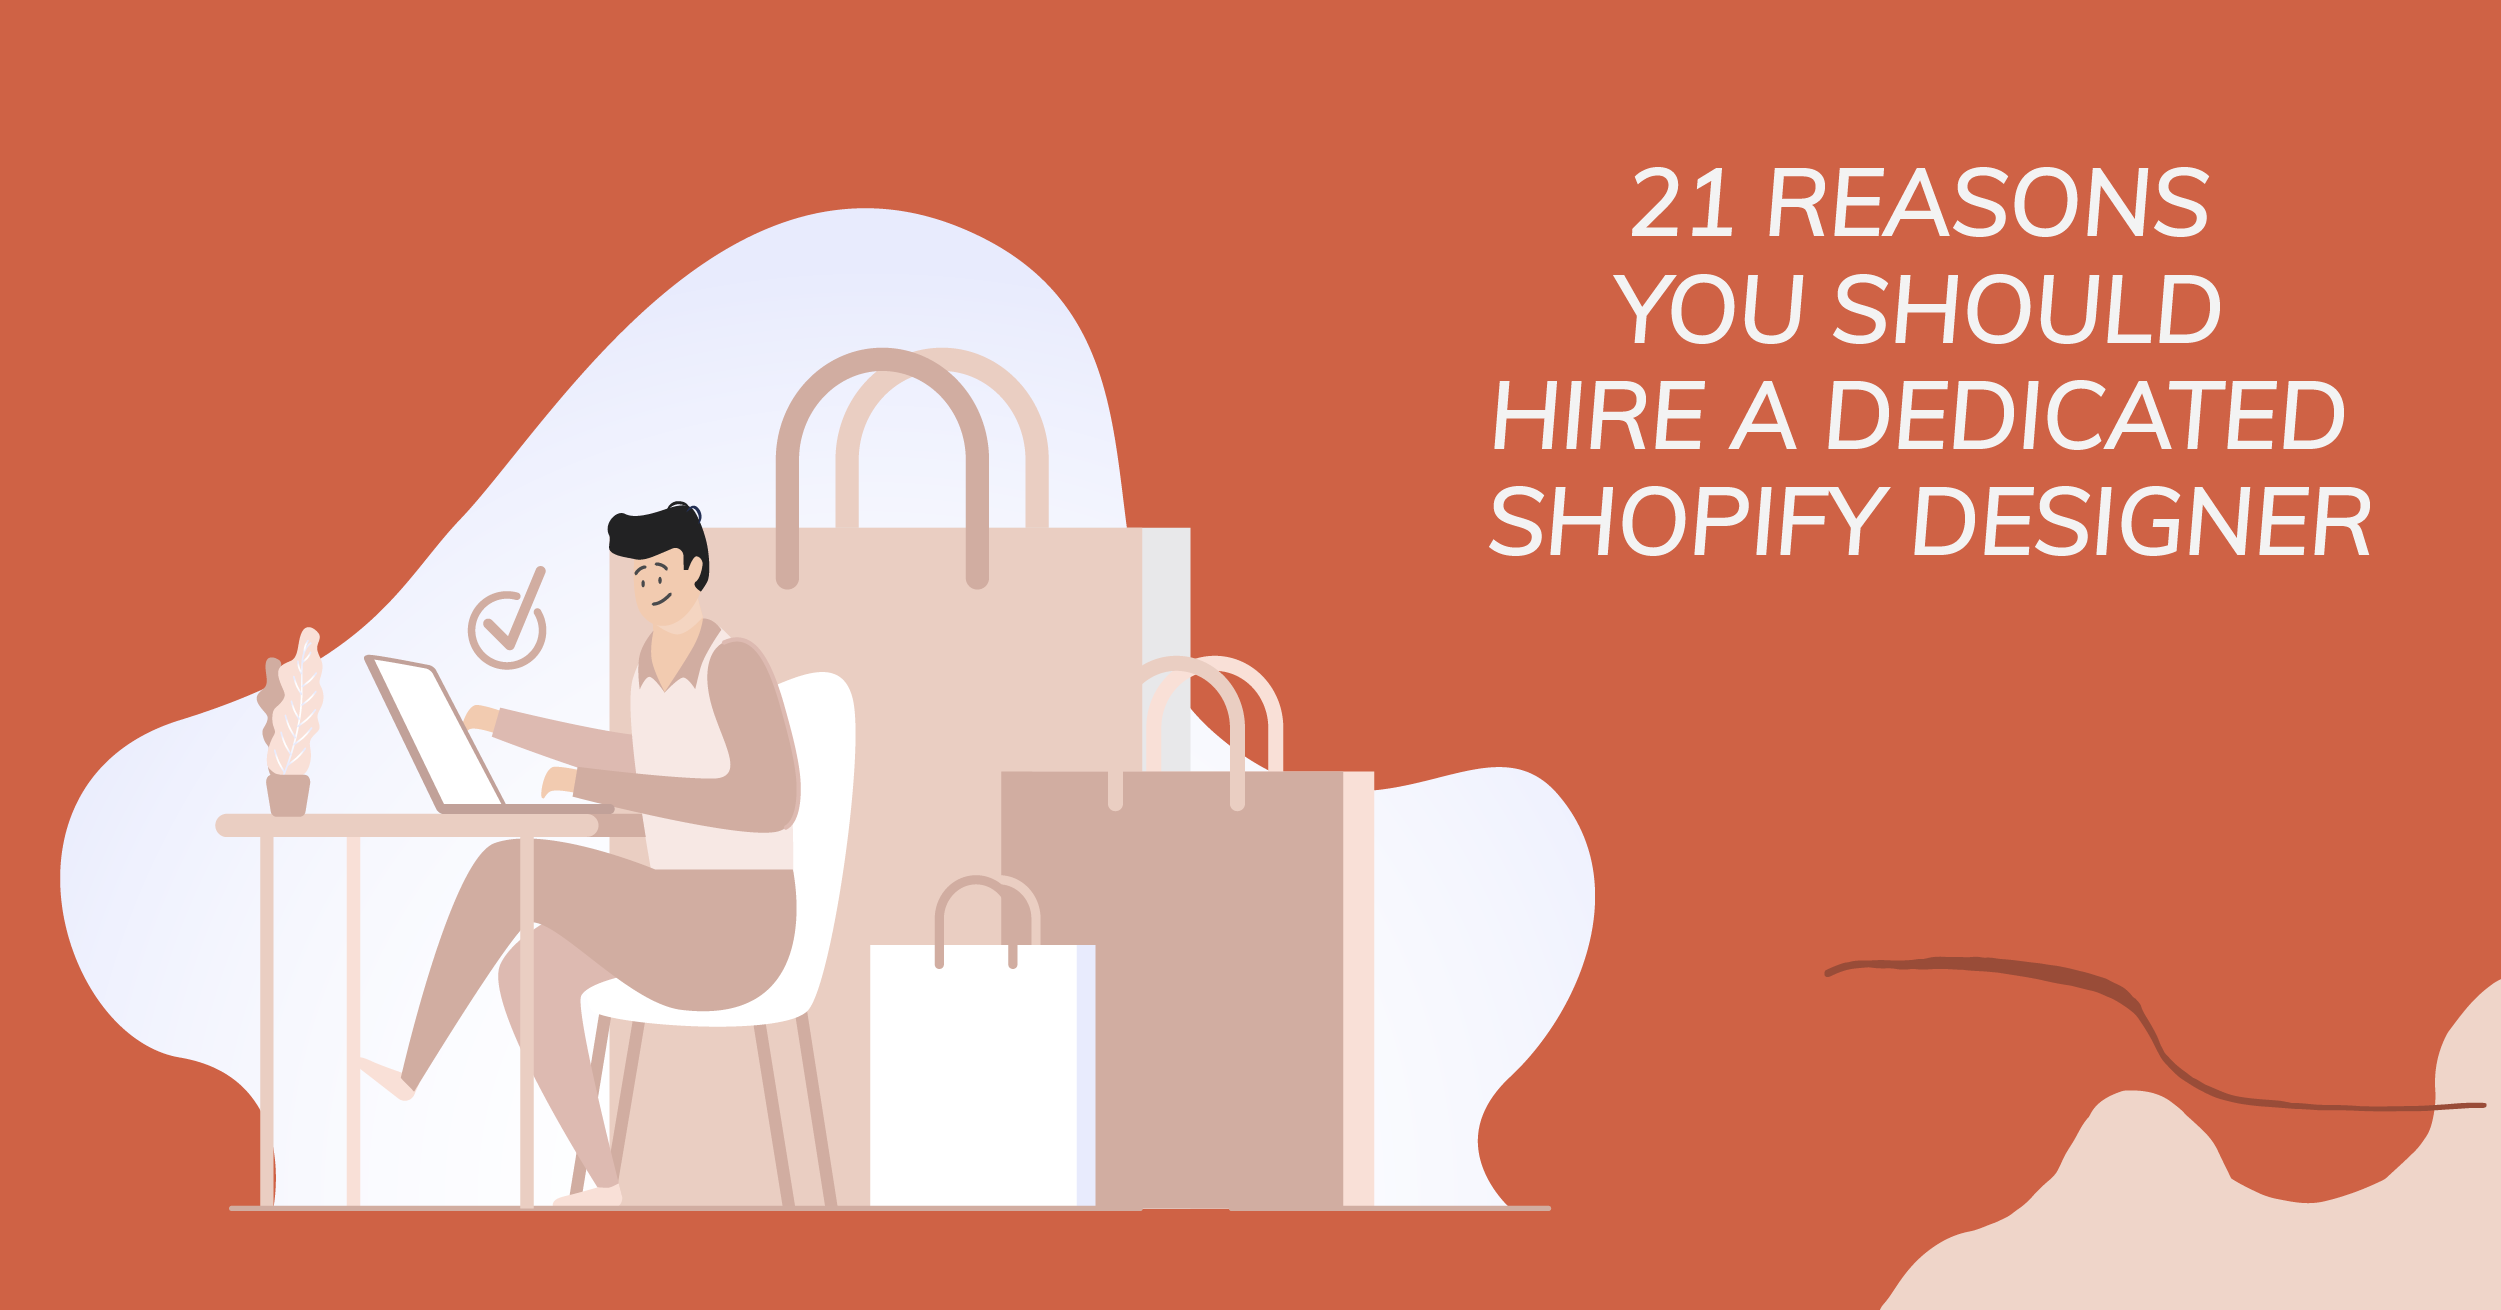 21 Reasons You Should Hire a Dedicated Shopify Designer